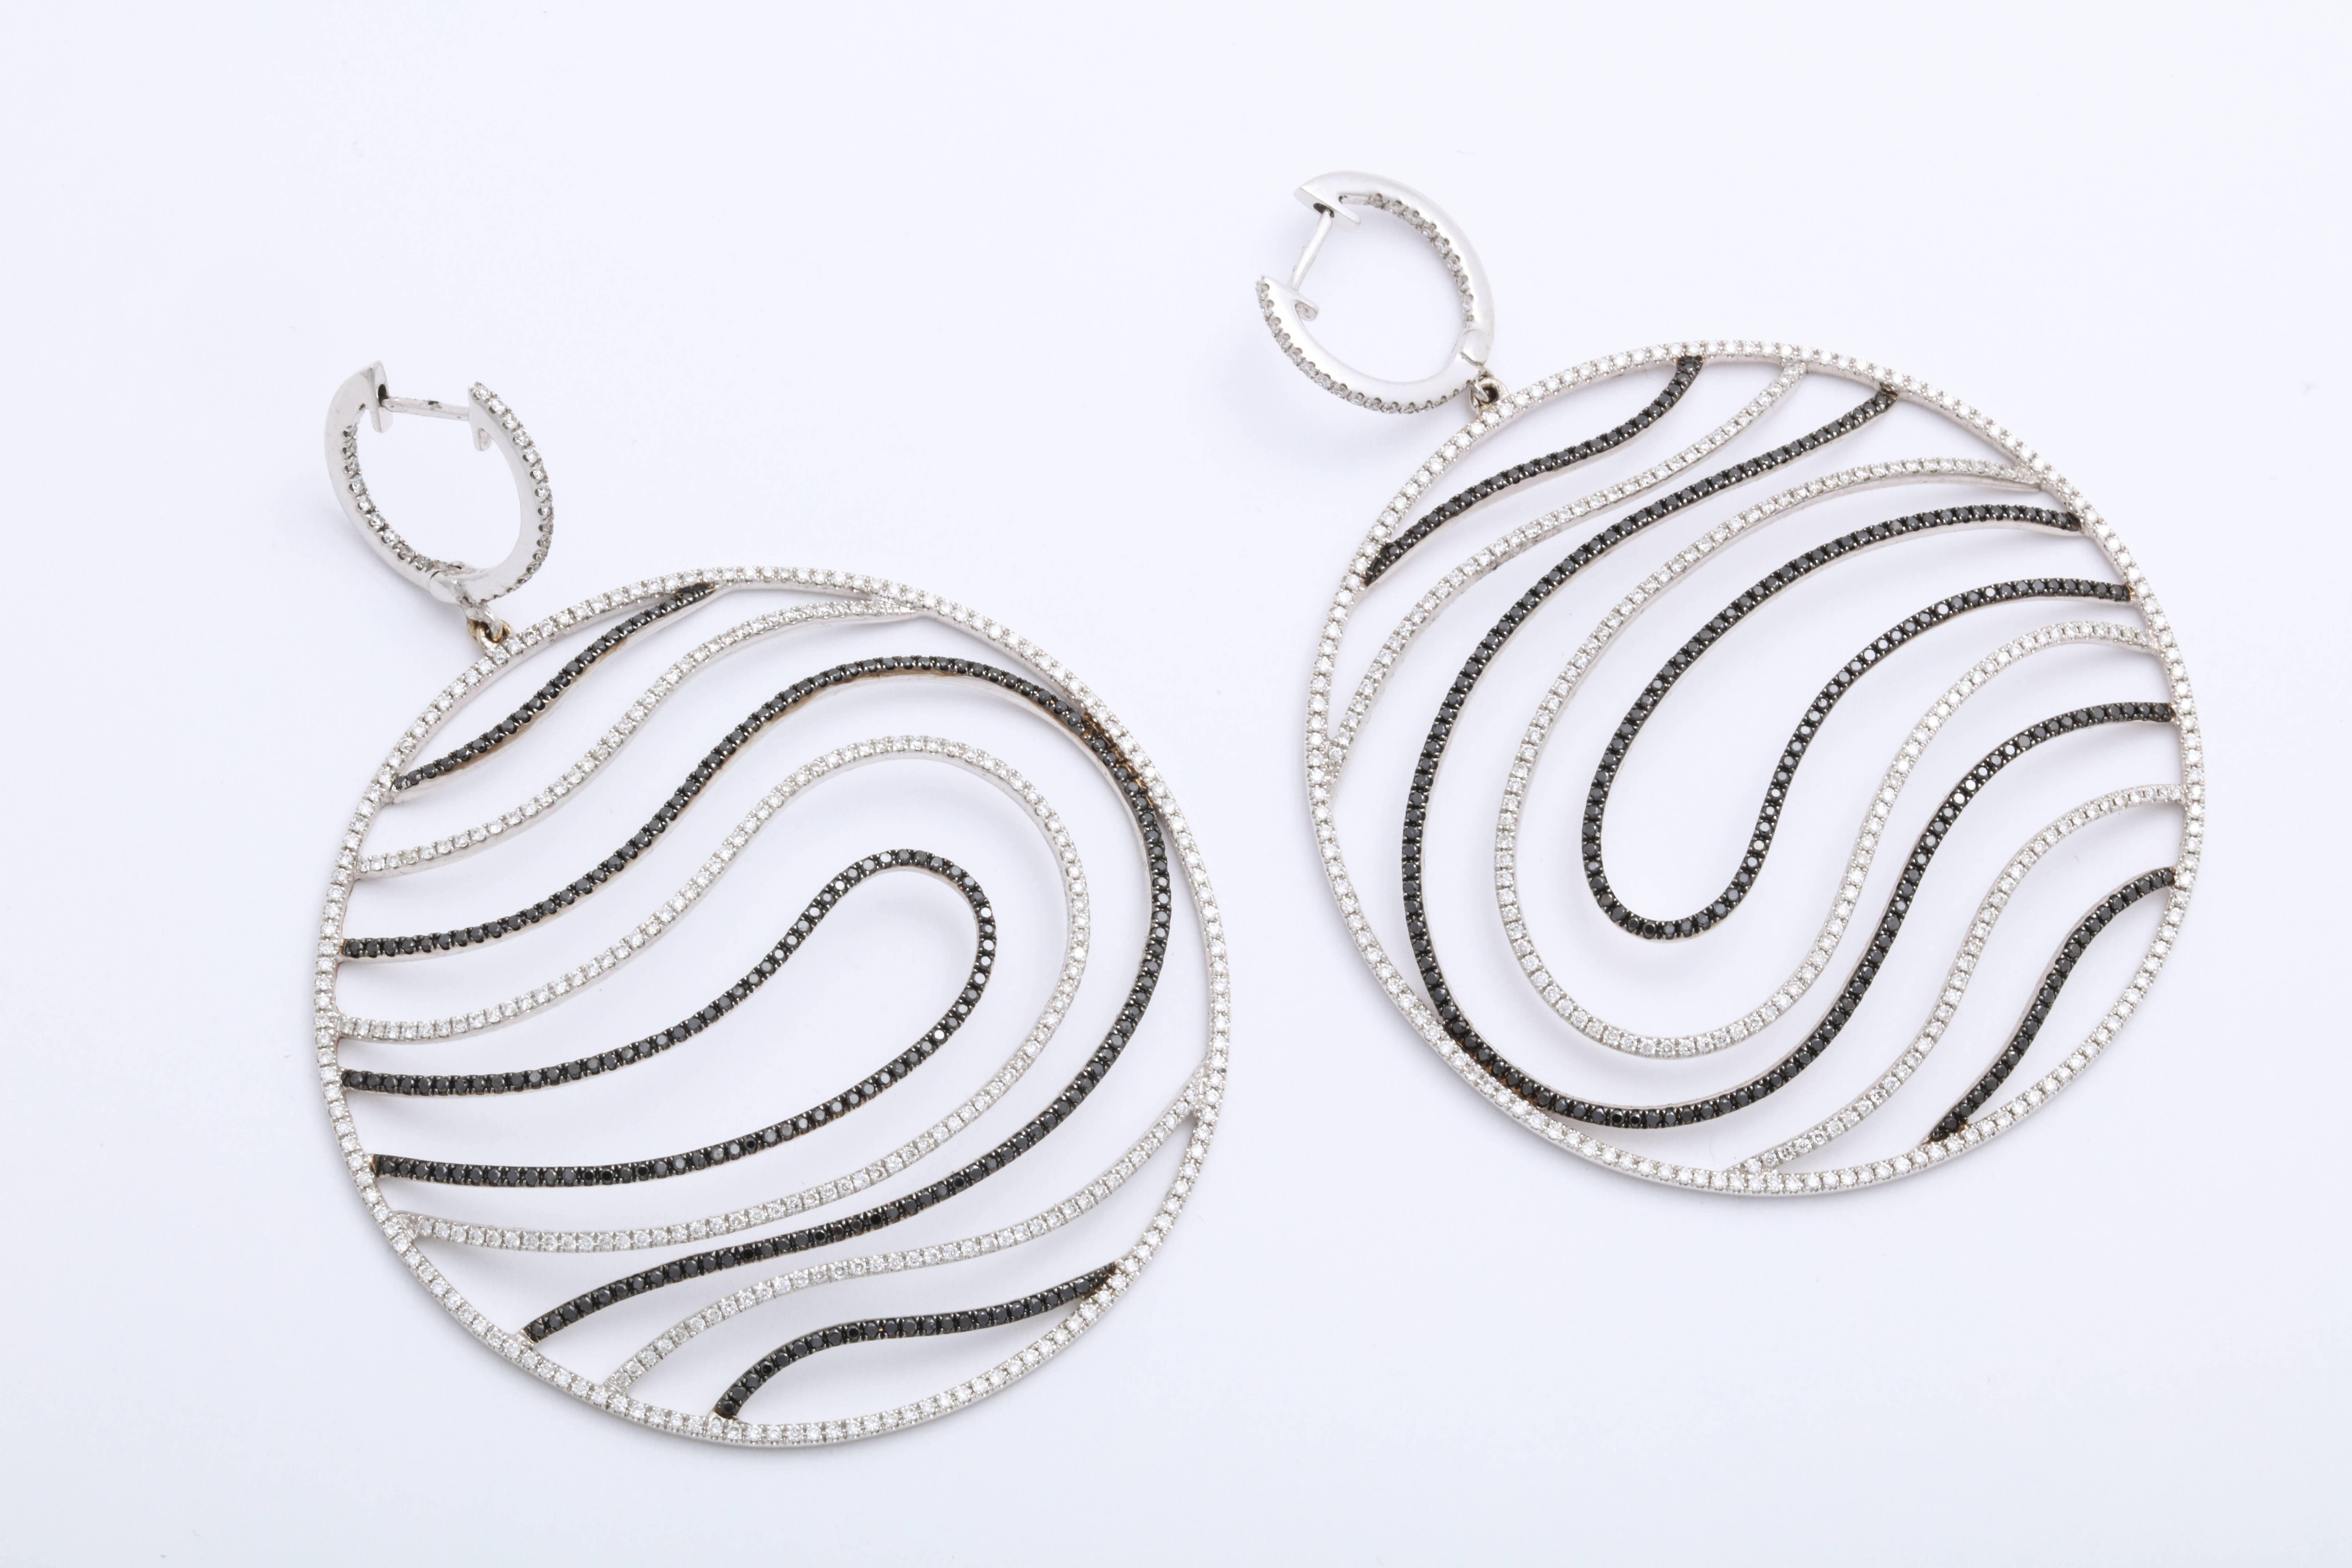 These showstopping earrings are 18 Karat white gold hoops that suspend over-sized circular disk pendants decorated with round black diamonds alternating with colorless diamond free-form waves: 3.58 carats combined total weight.